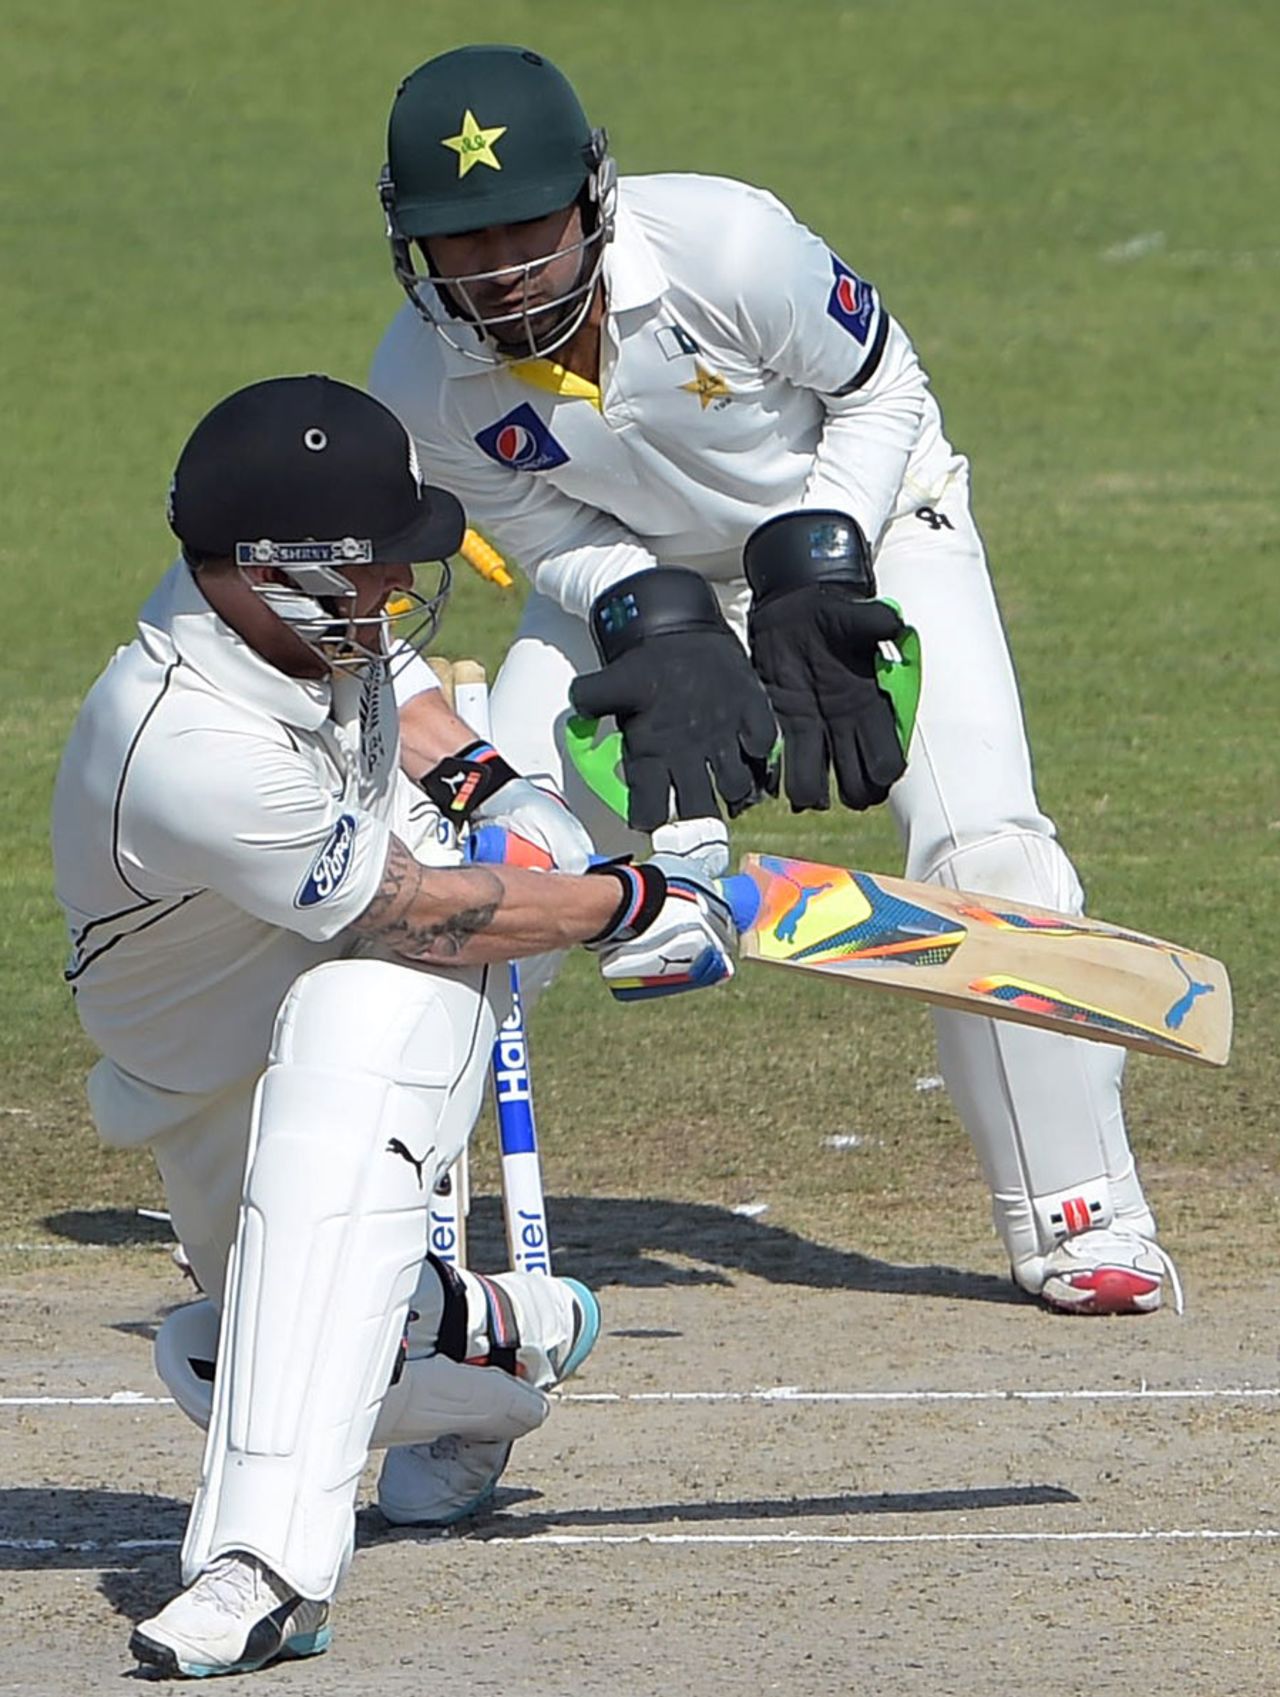 Brendon McCullum is bowled round his legs by Yasir Shah, Pakistan v New Zealand, 3rd Test, Sharjah, 3rd day, November 29, 2014